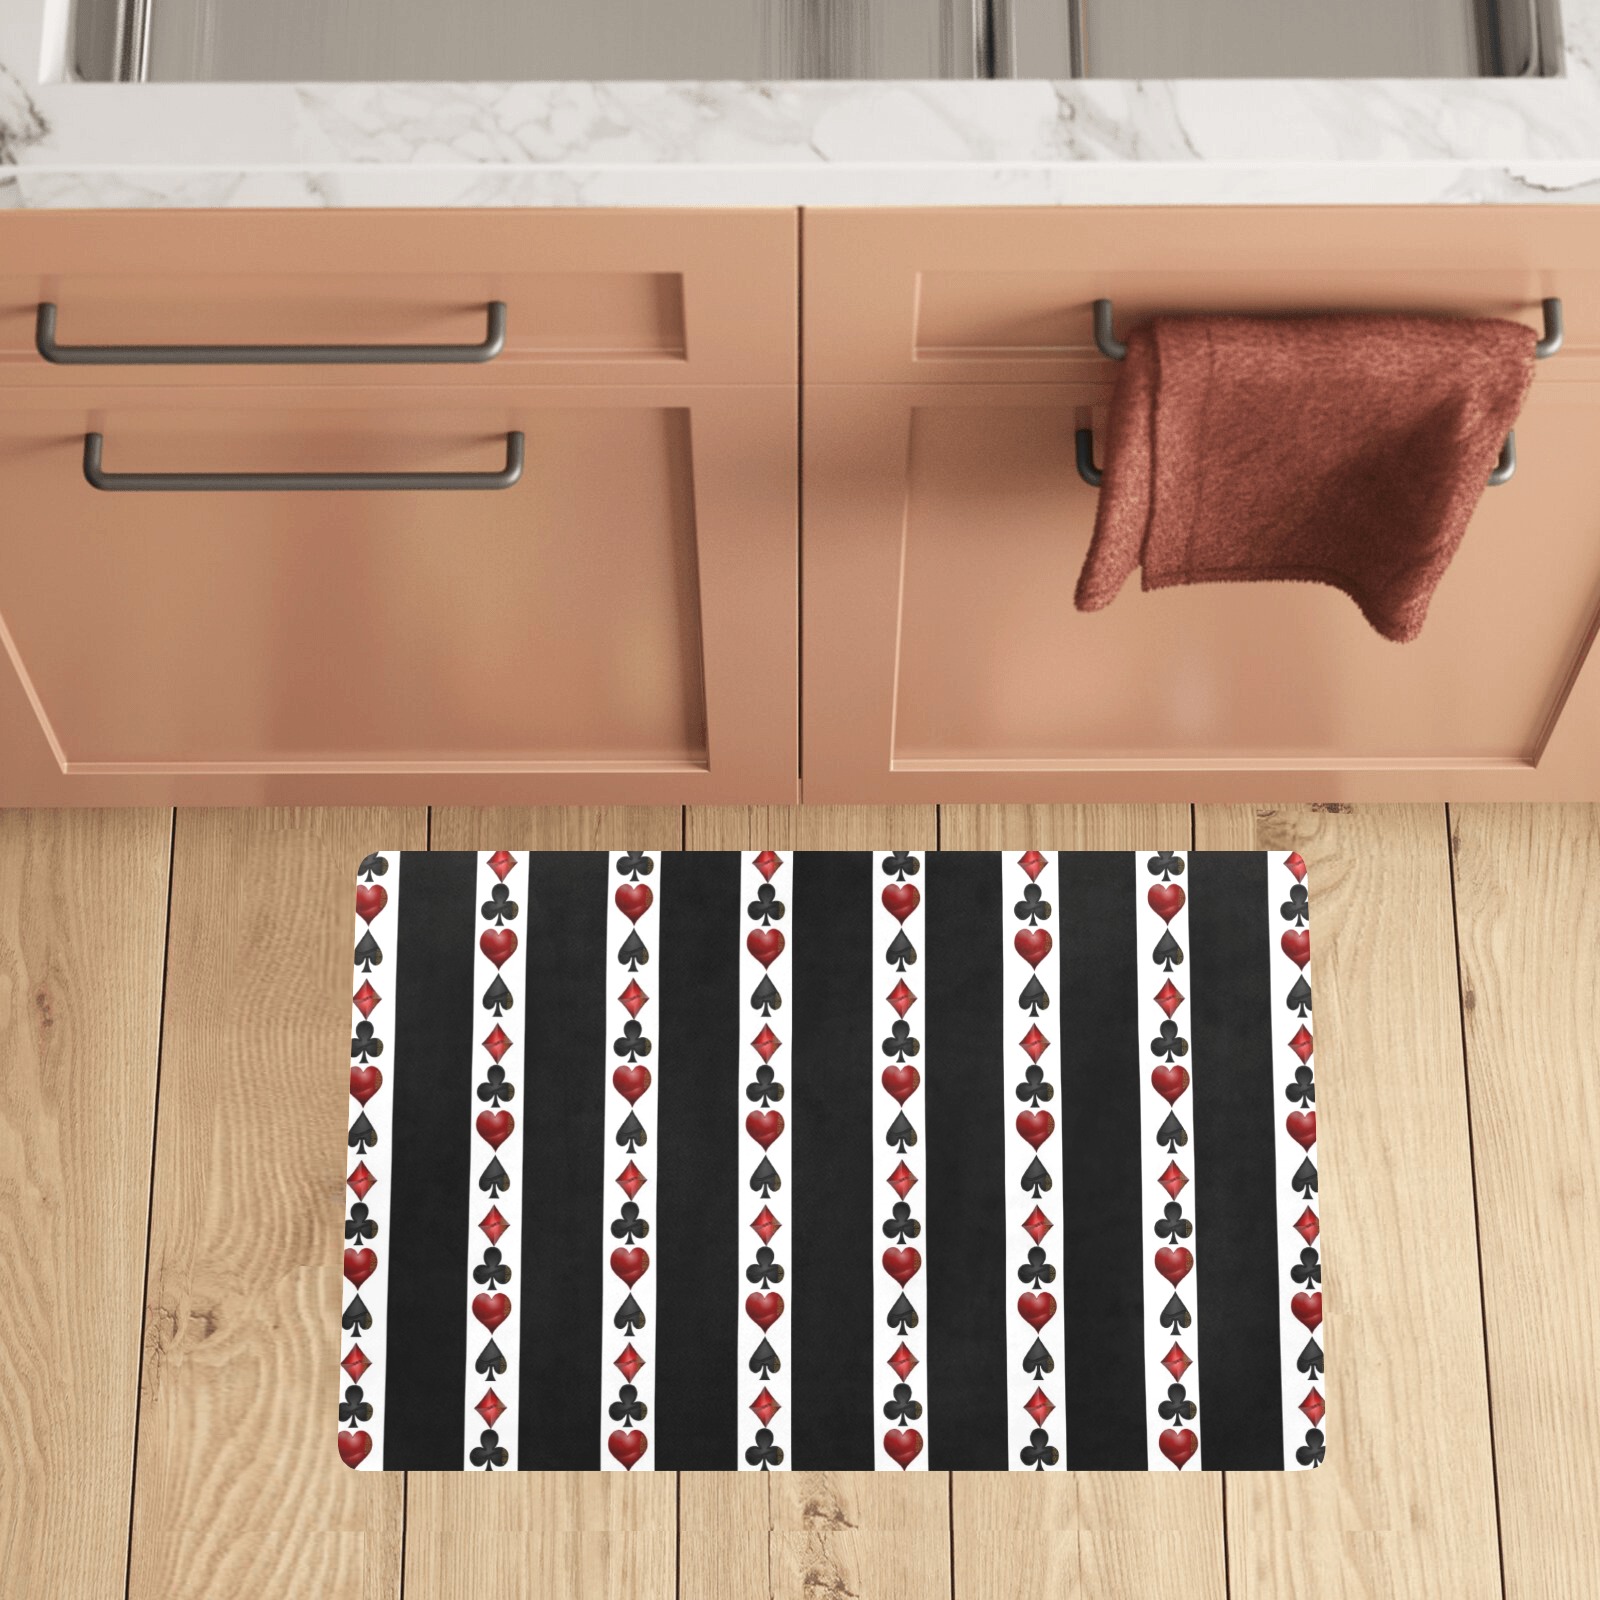 Black Red Playing Card Shapes Kitchen Mat 28"x17"